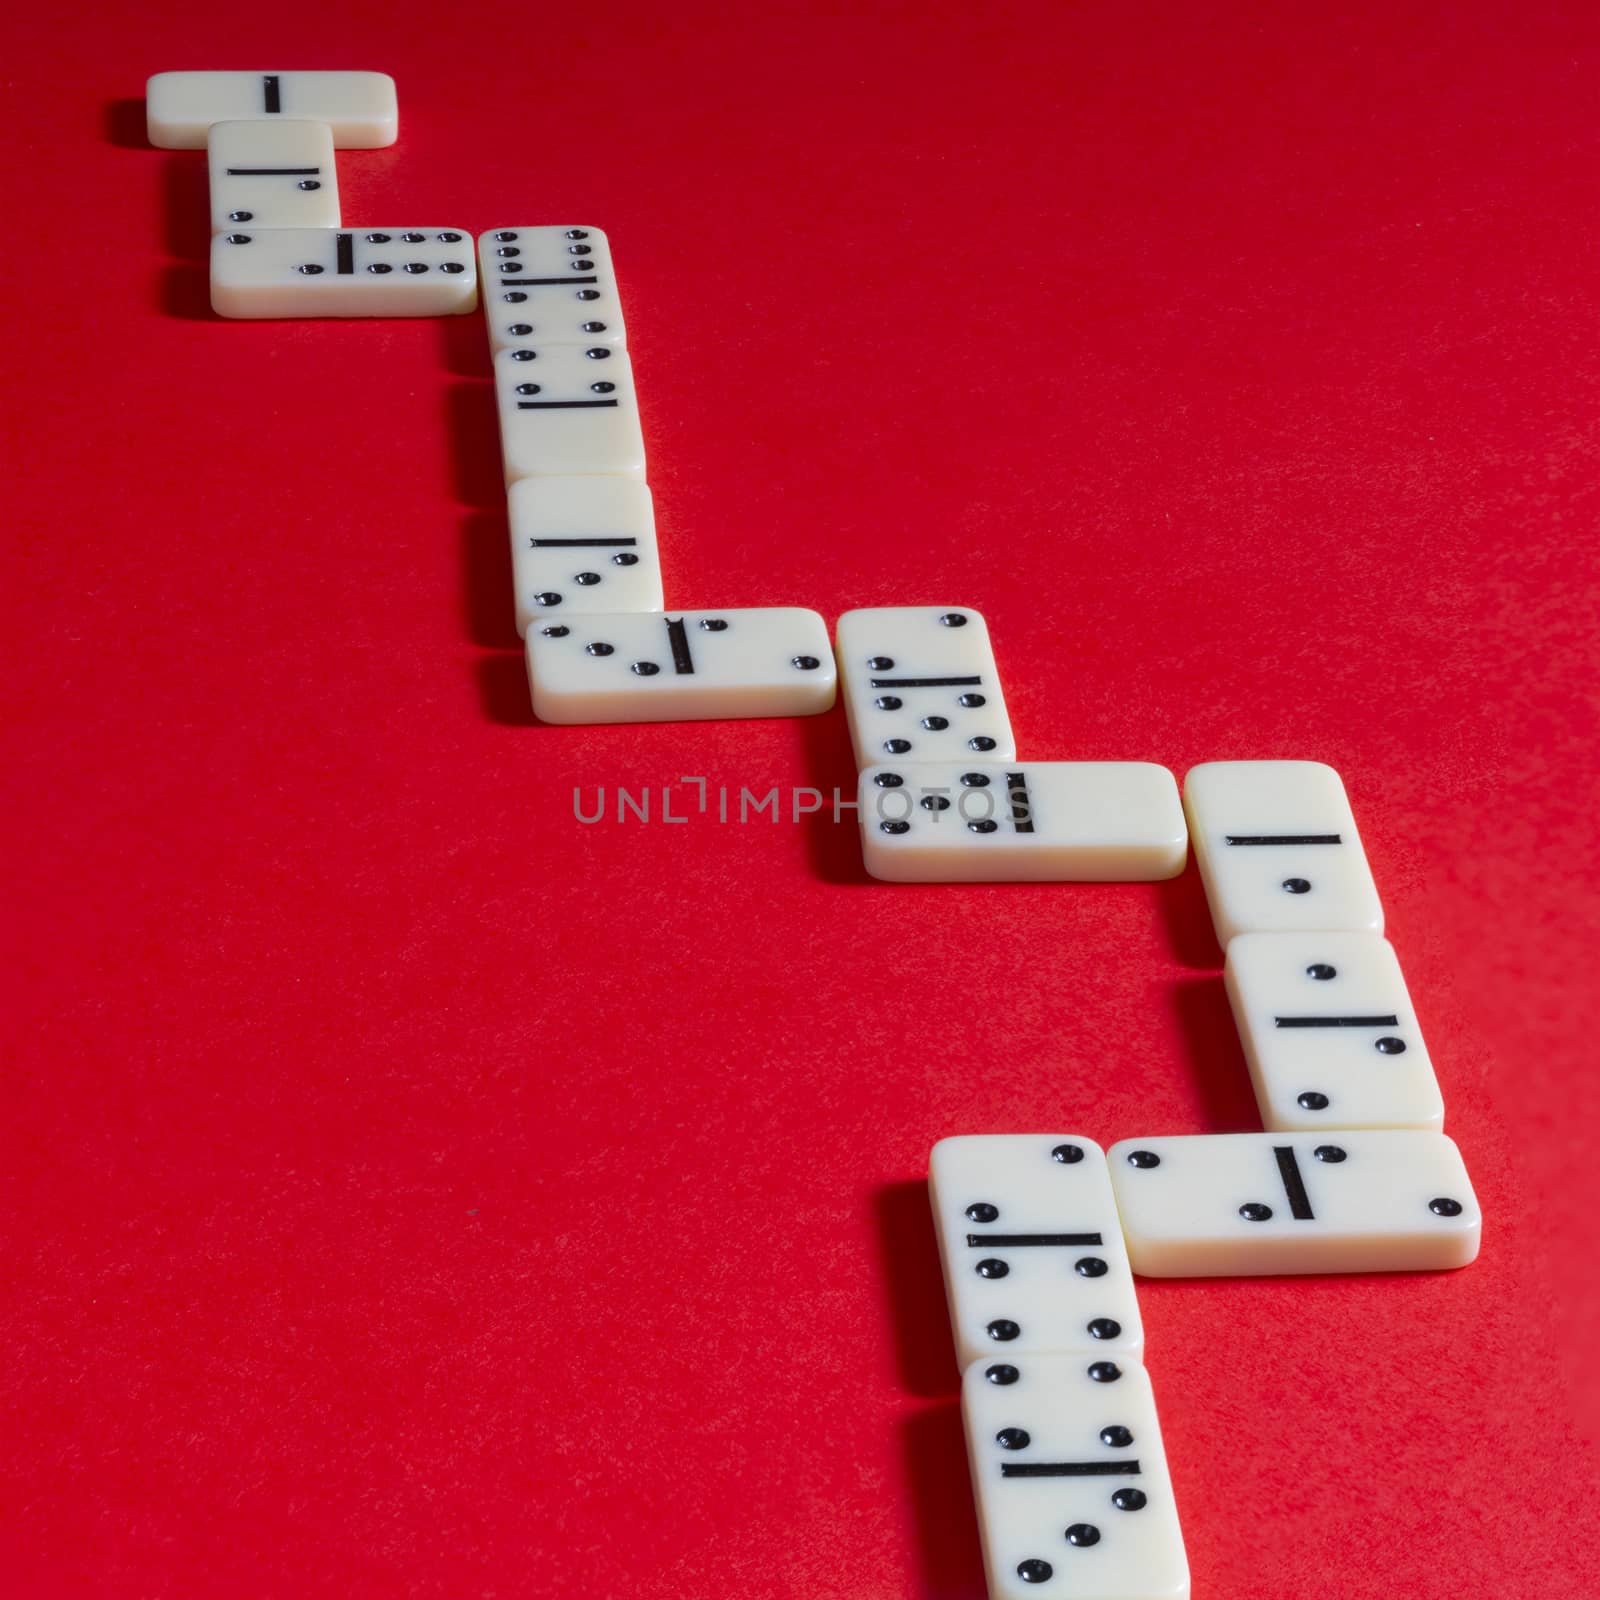 the domino game pieces on a red colored surface